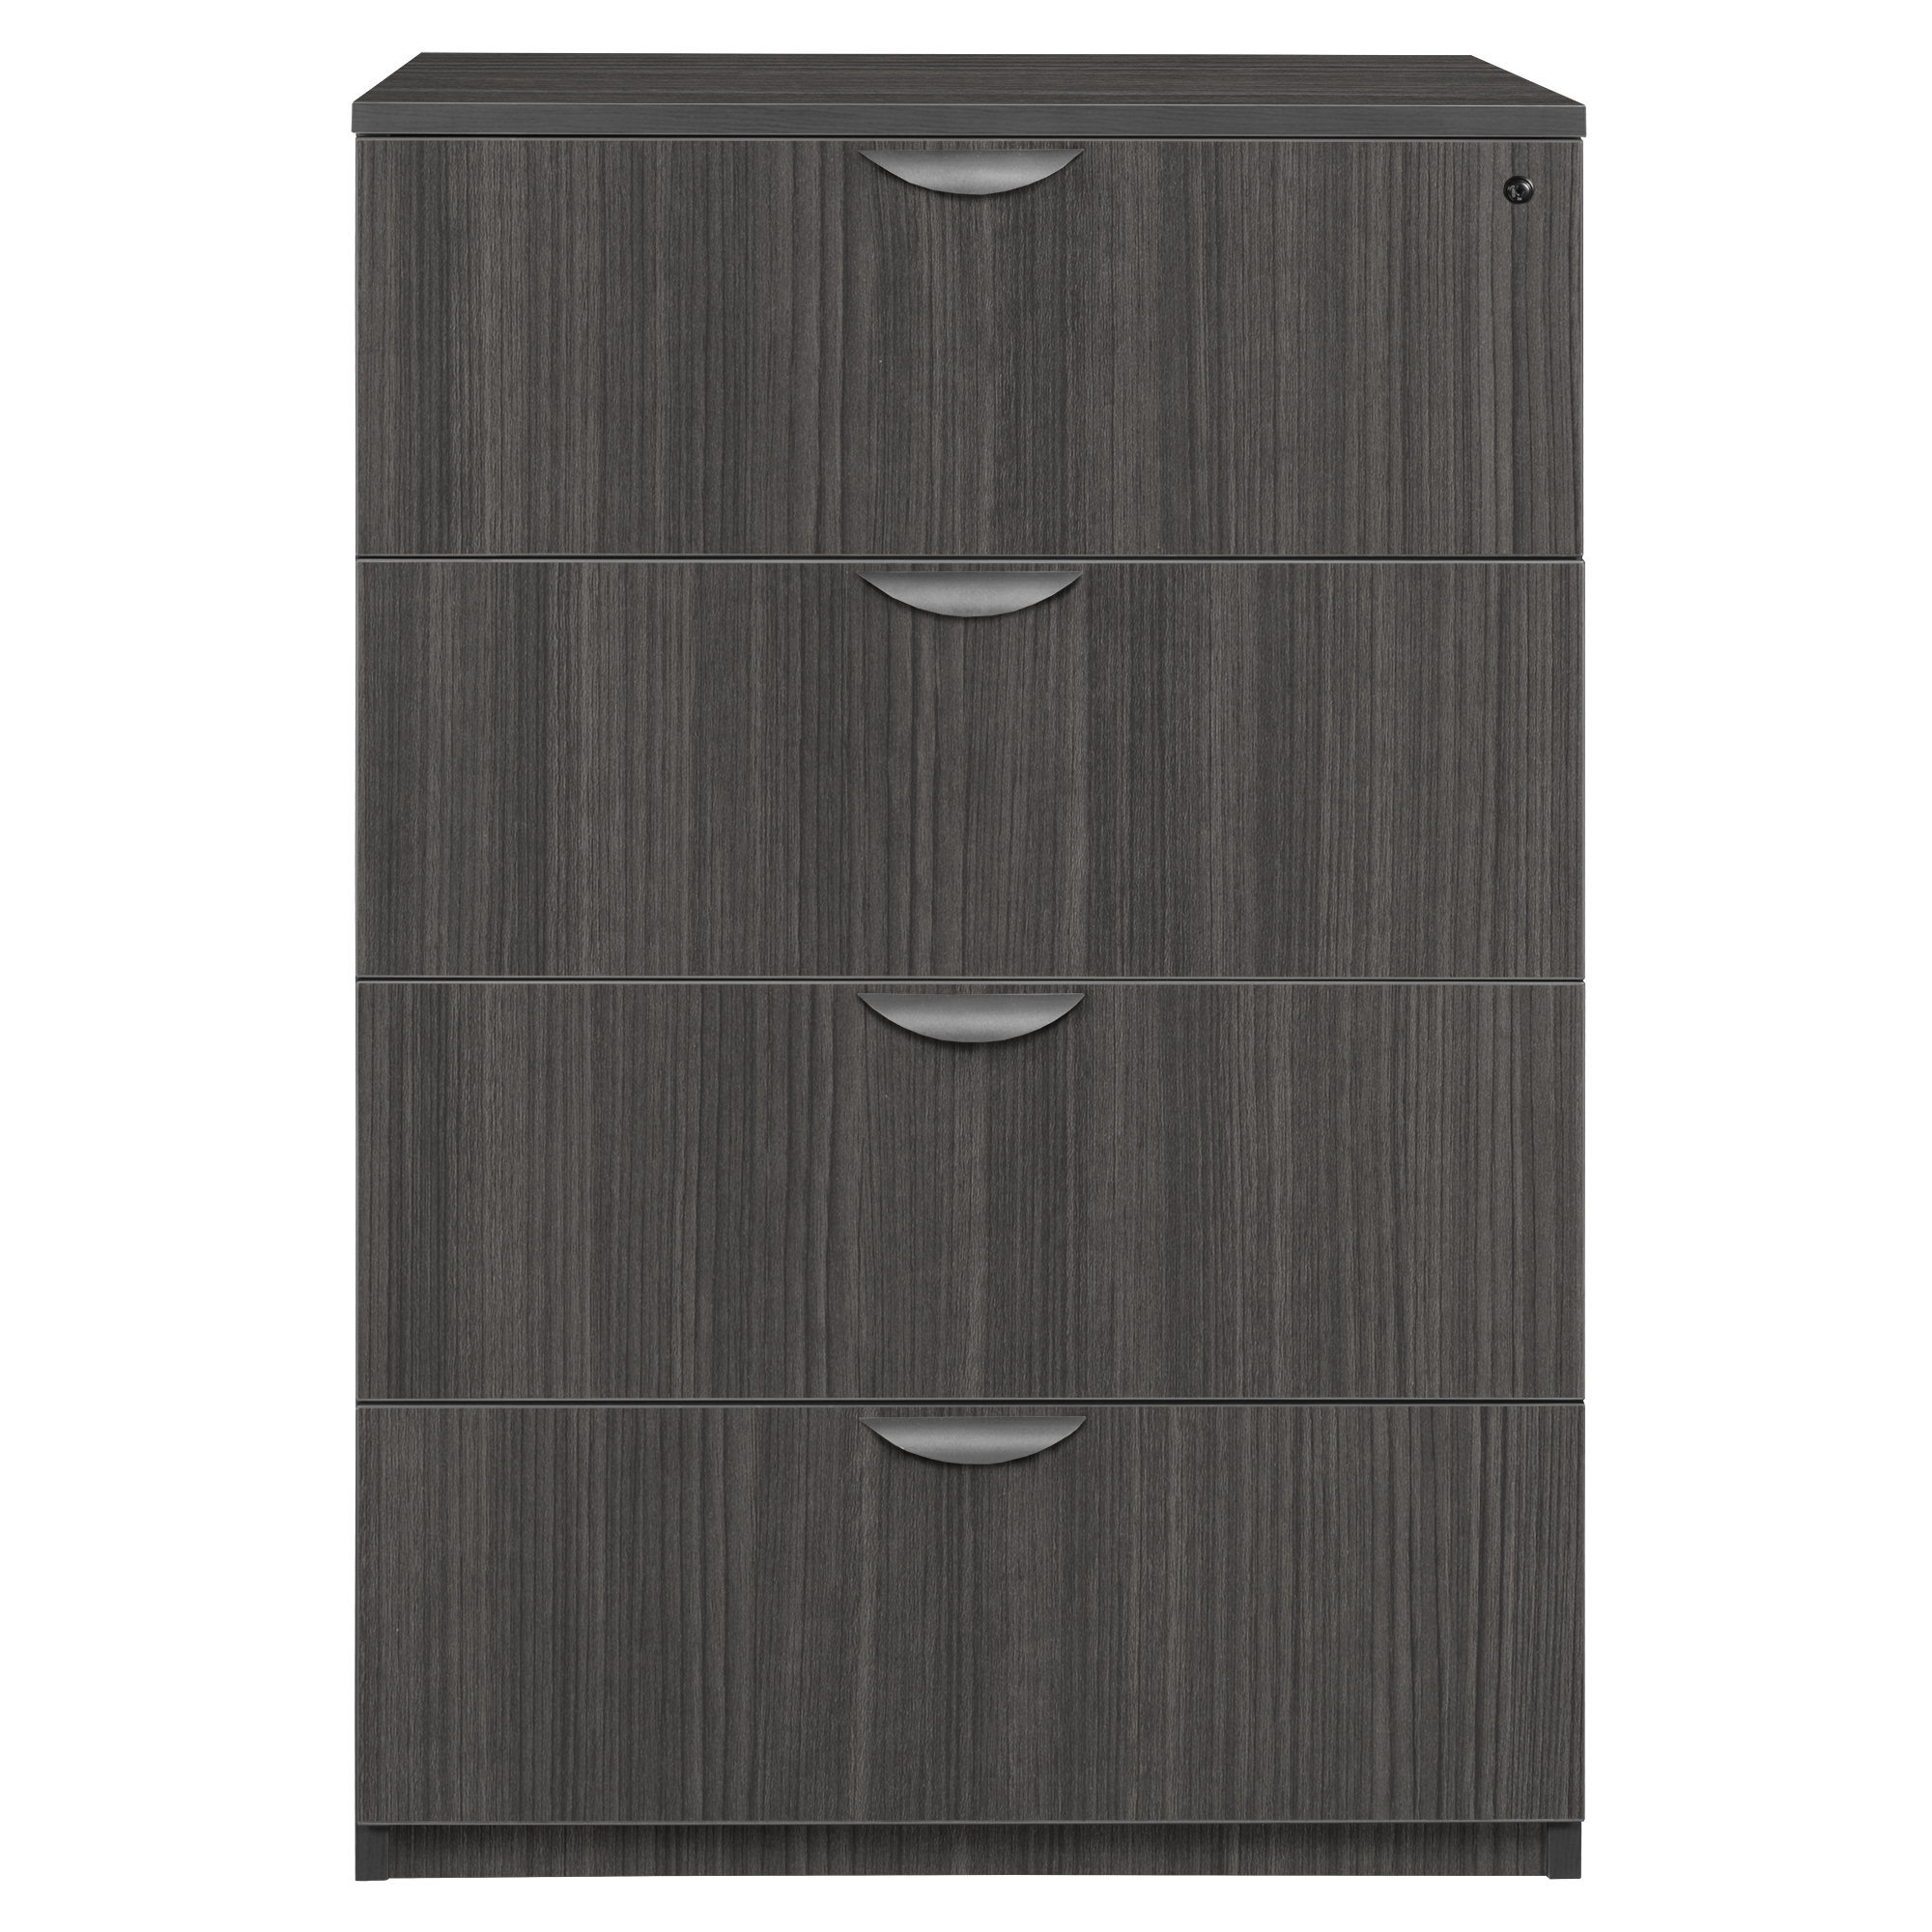 Legacy 4-Drawer Lateral File- Ash Grey - image 4 of 8